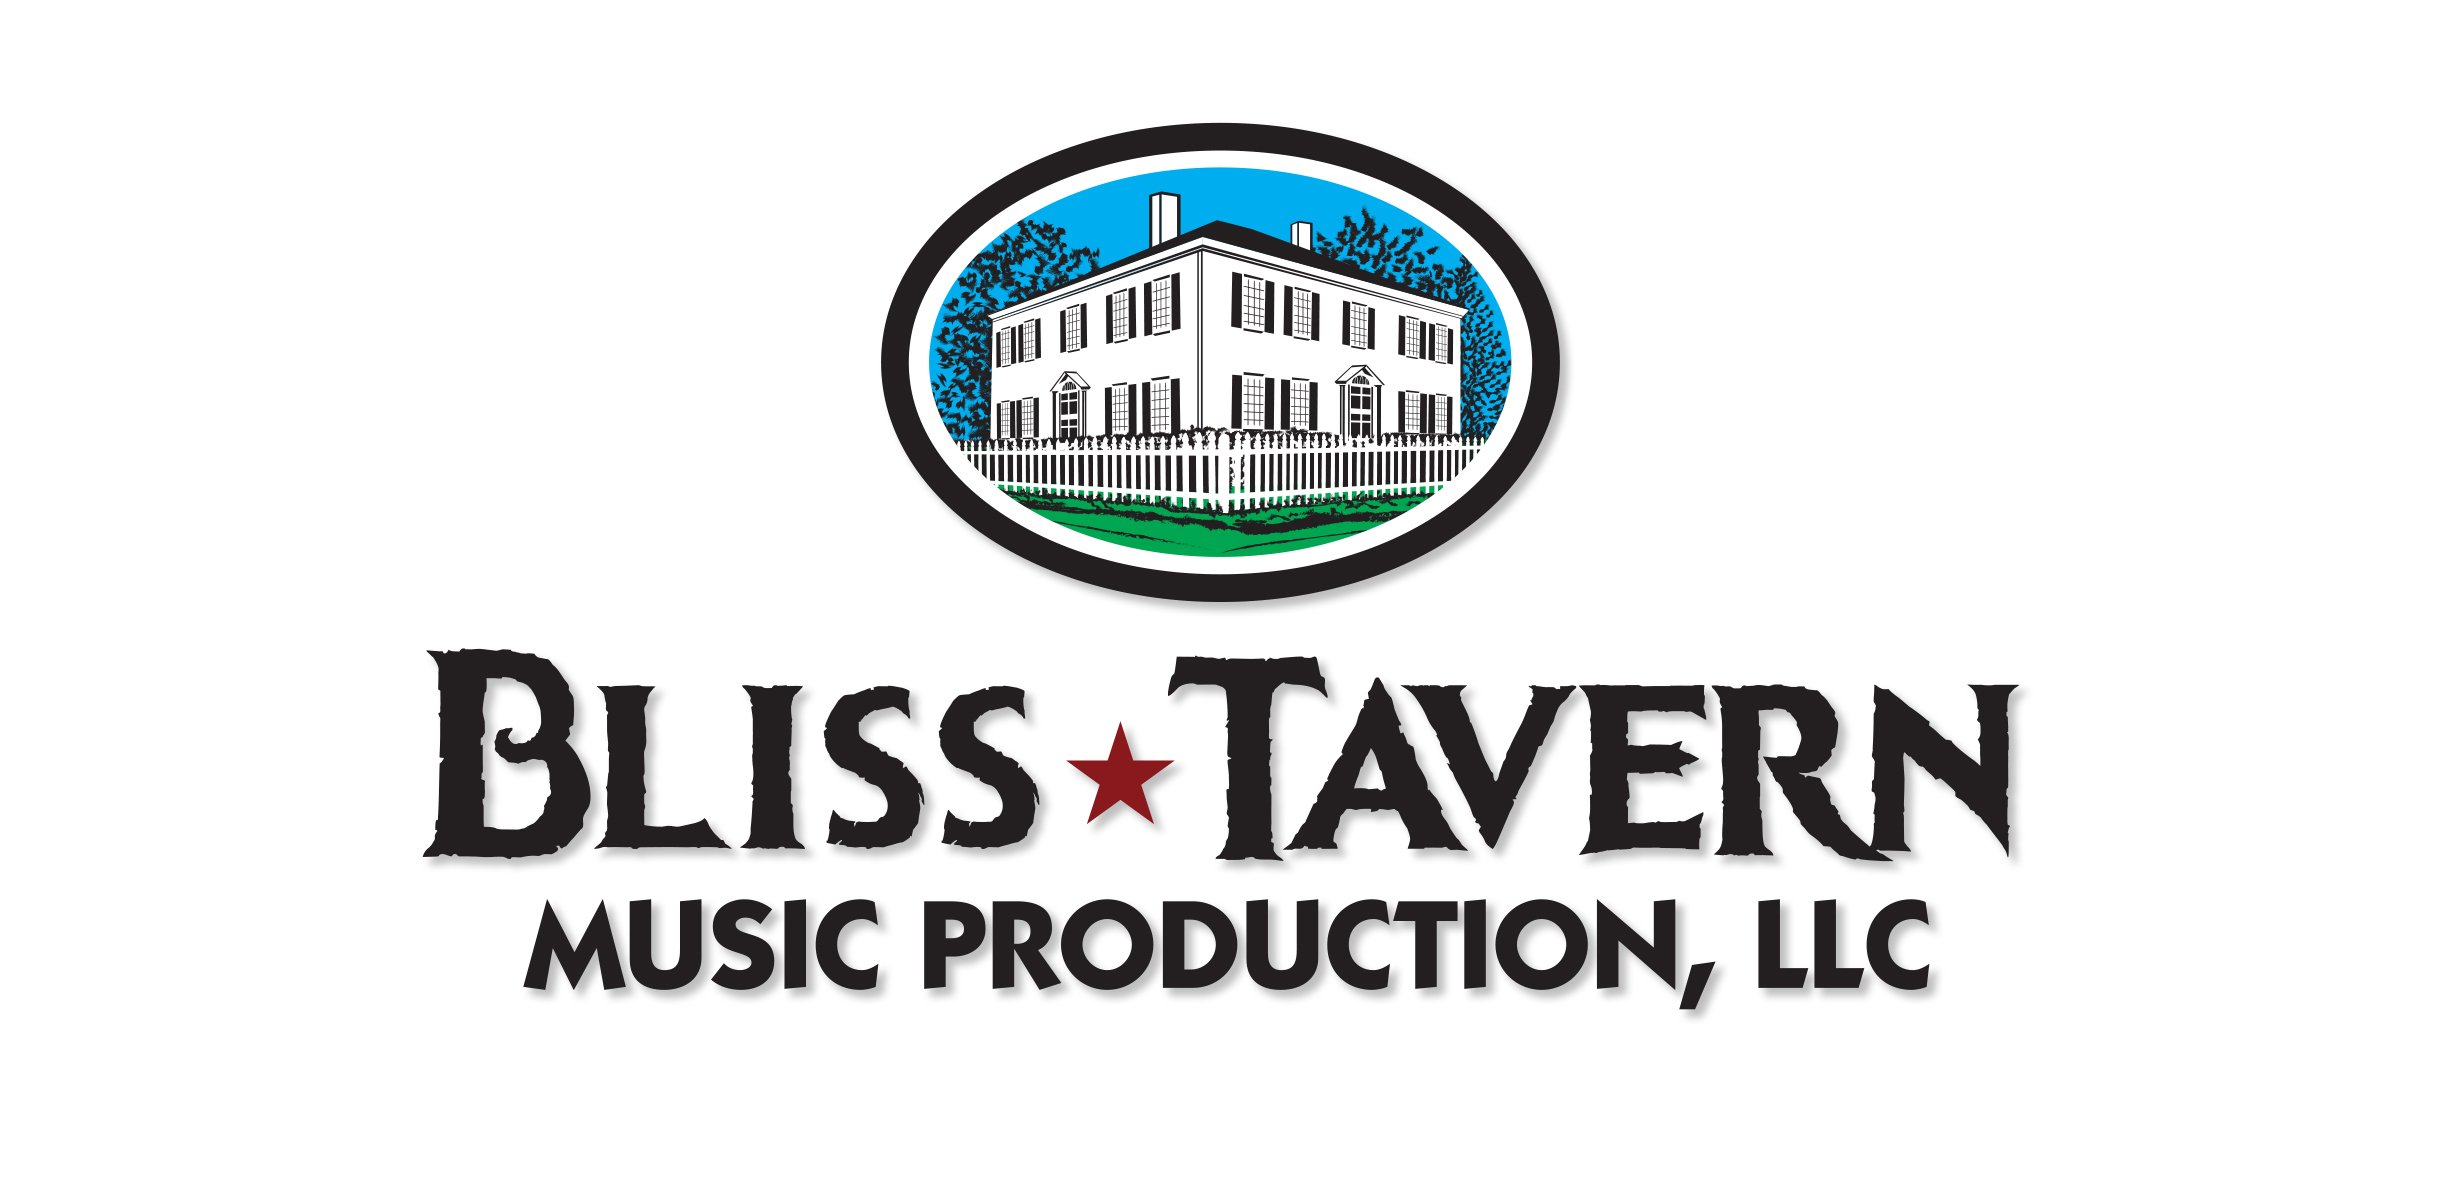 Logo and Visual Identity Design for Bliss Tavern Music Production, LLC by SP STUDIOS.